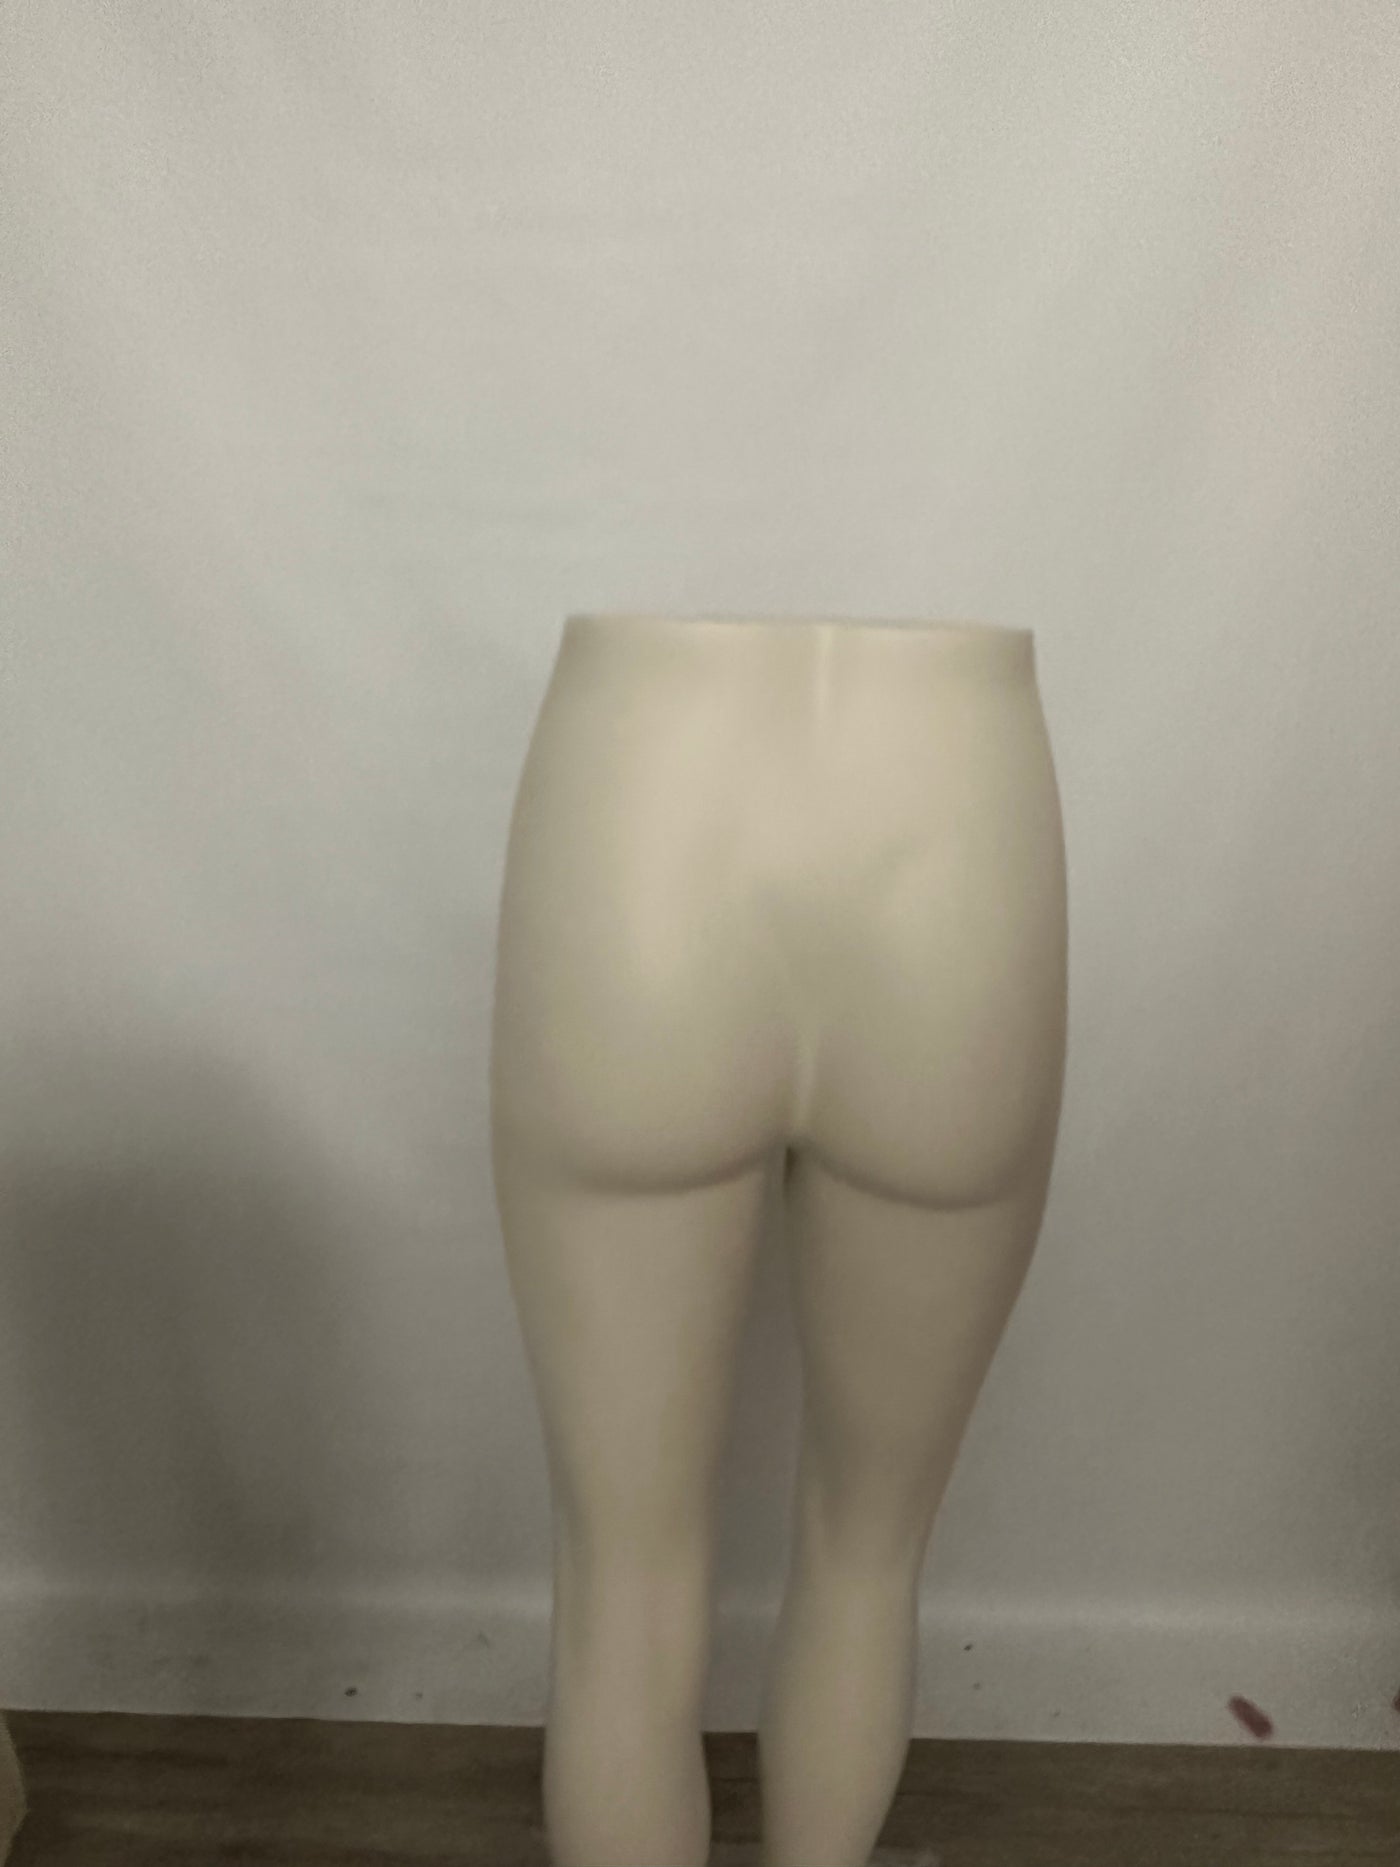 Used Female Pant Leg Forms